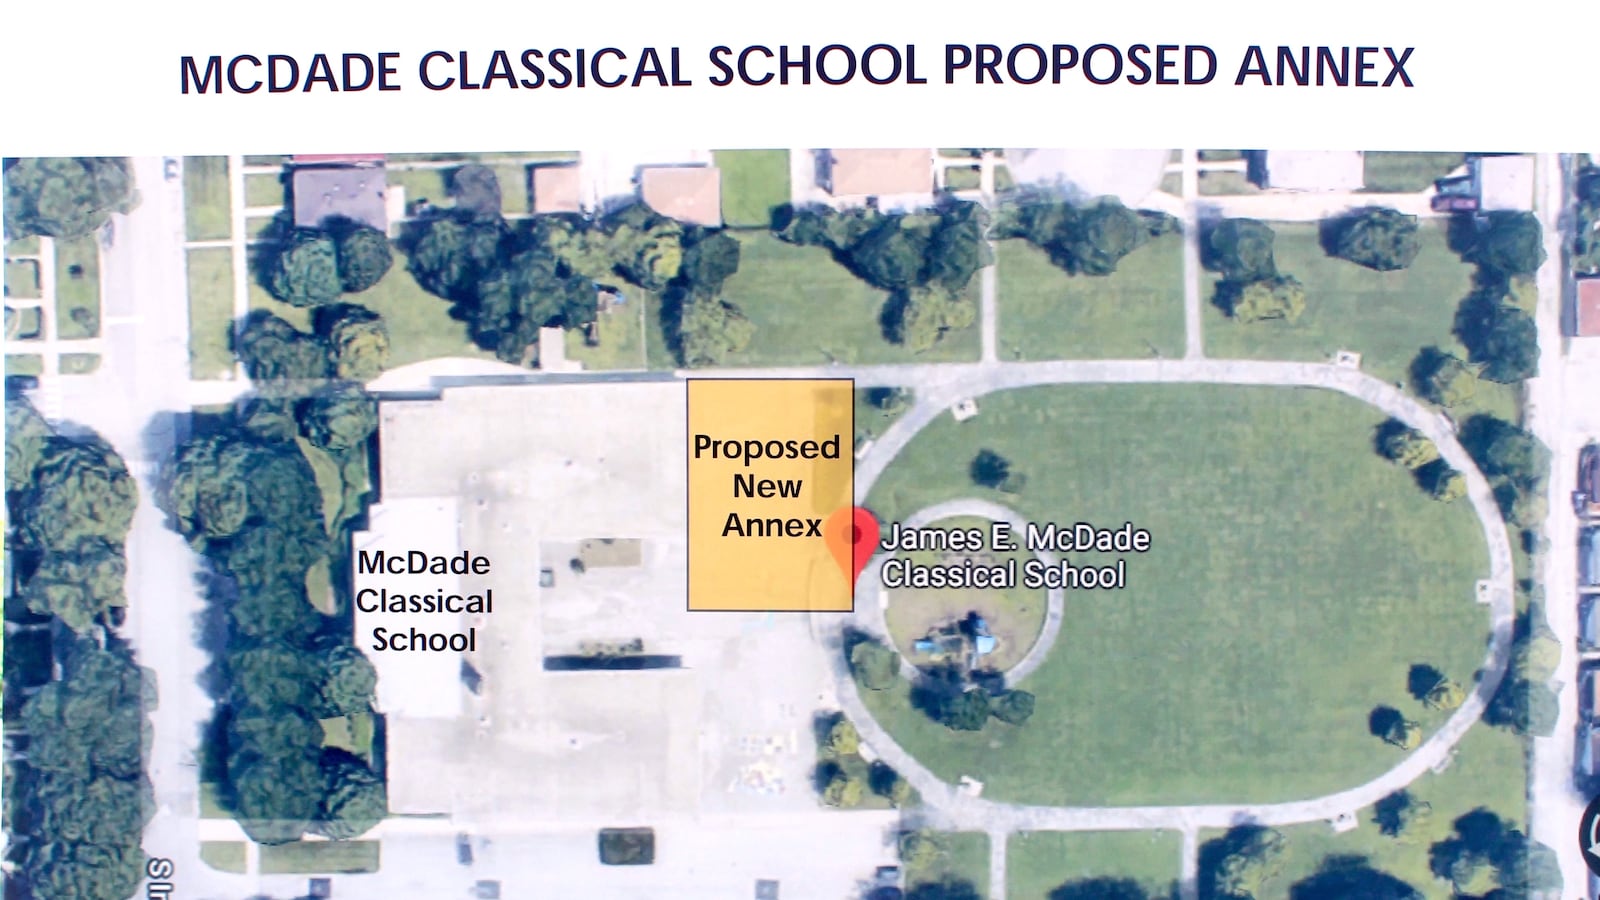 The district is expanding three classical schools, including McDade in Chatham